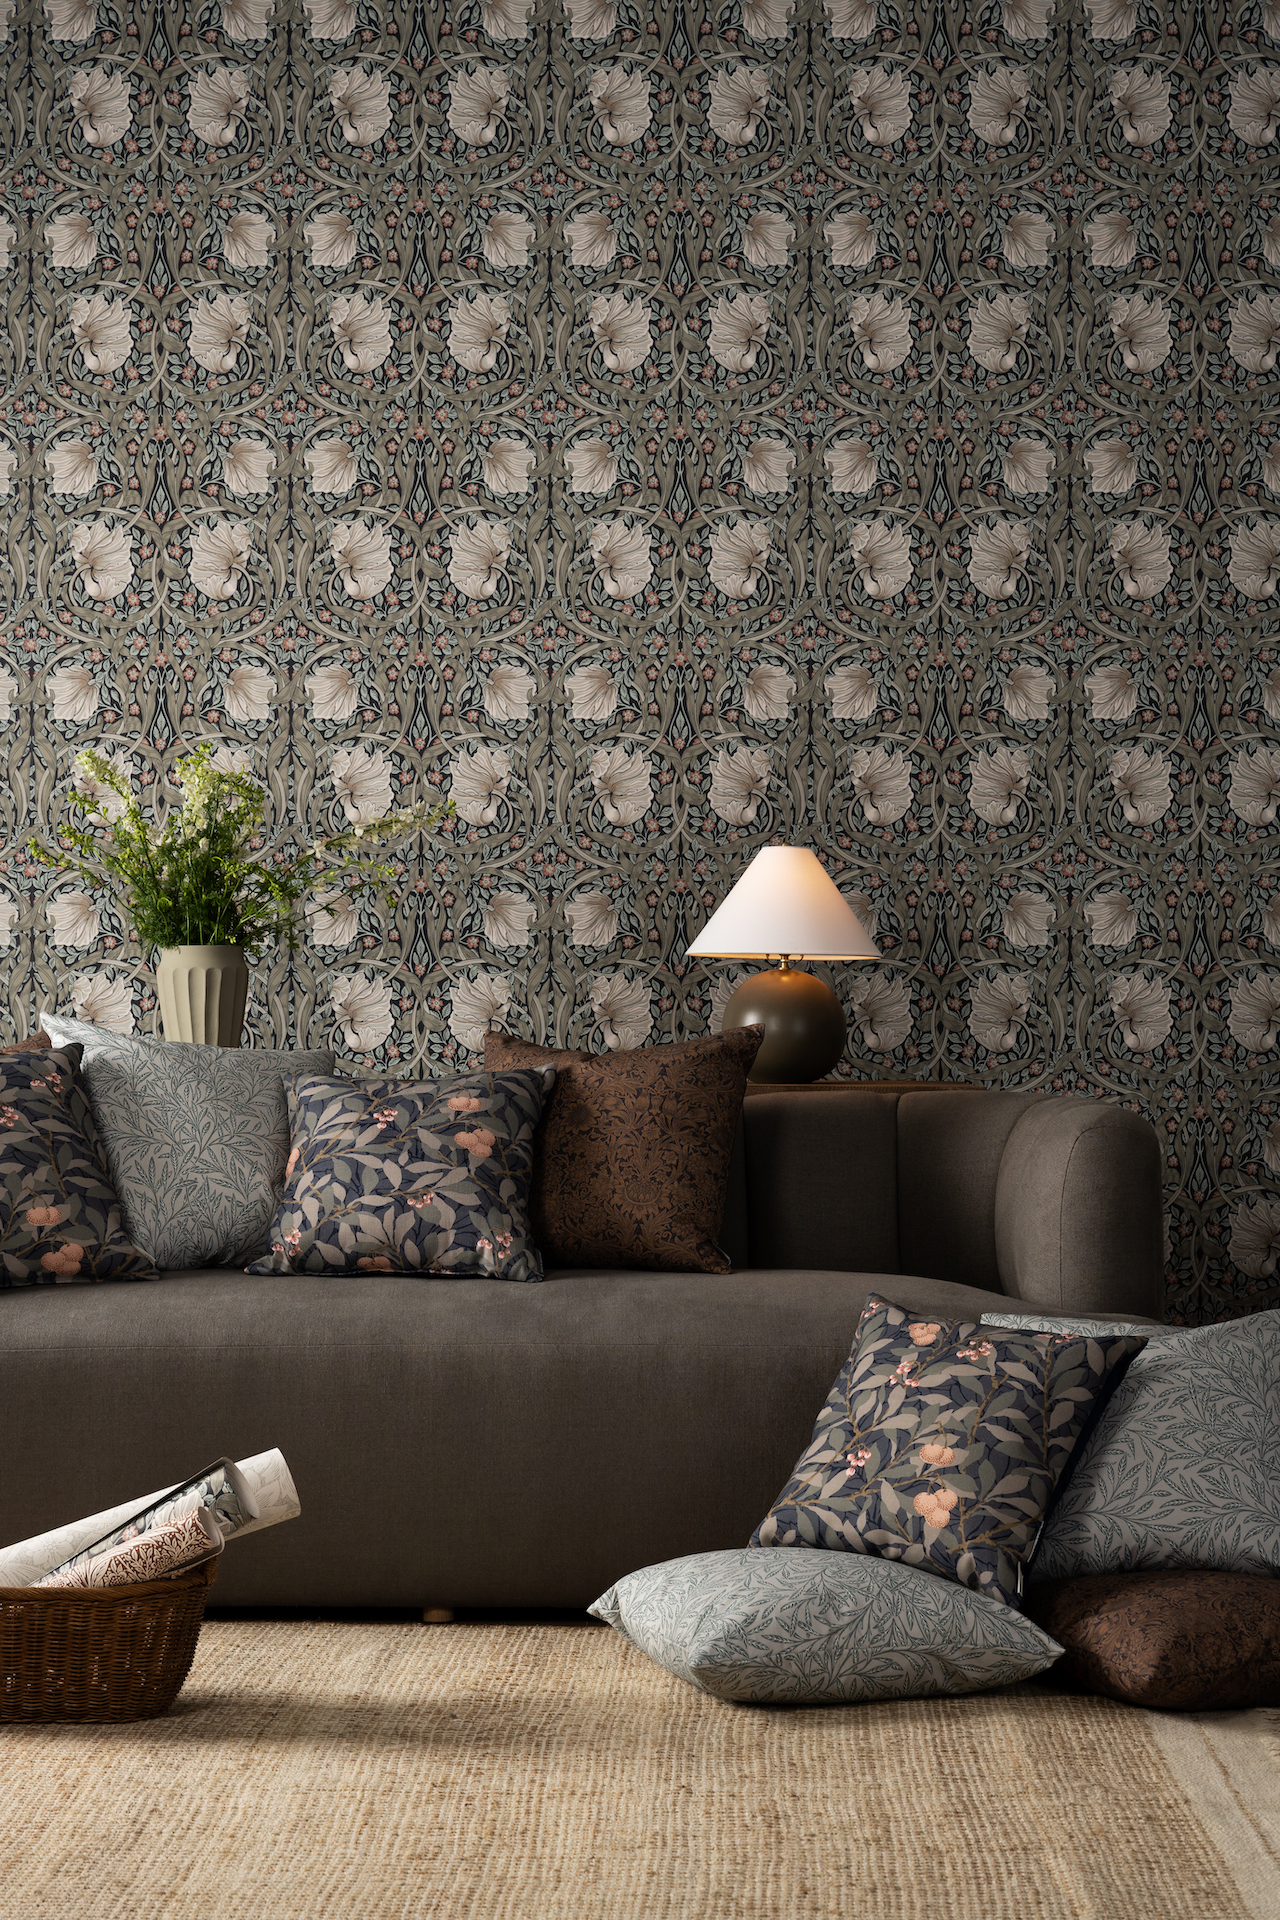 Sofa with floral wallpaper in the background